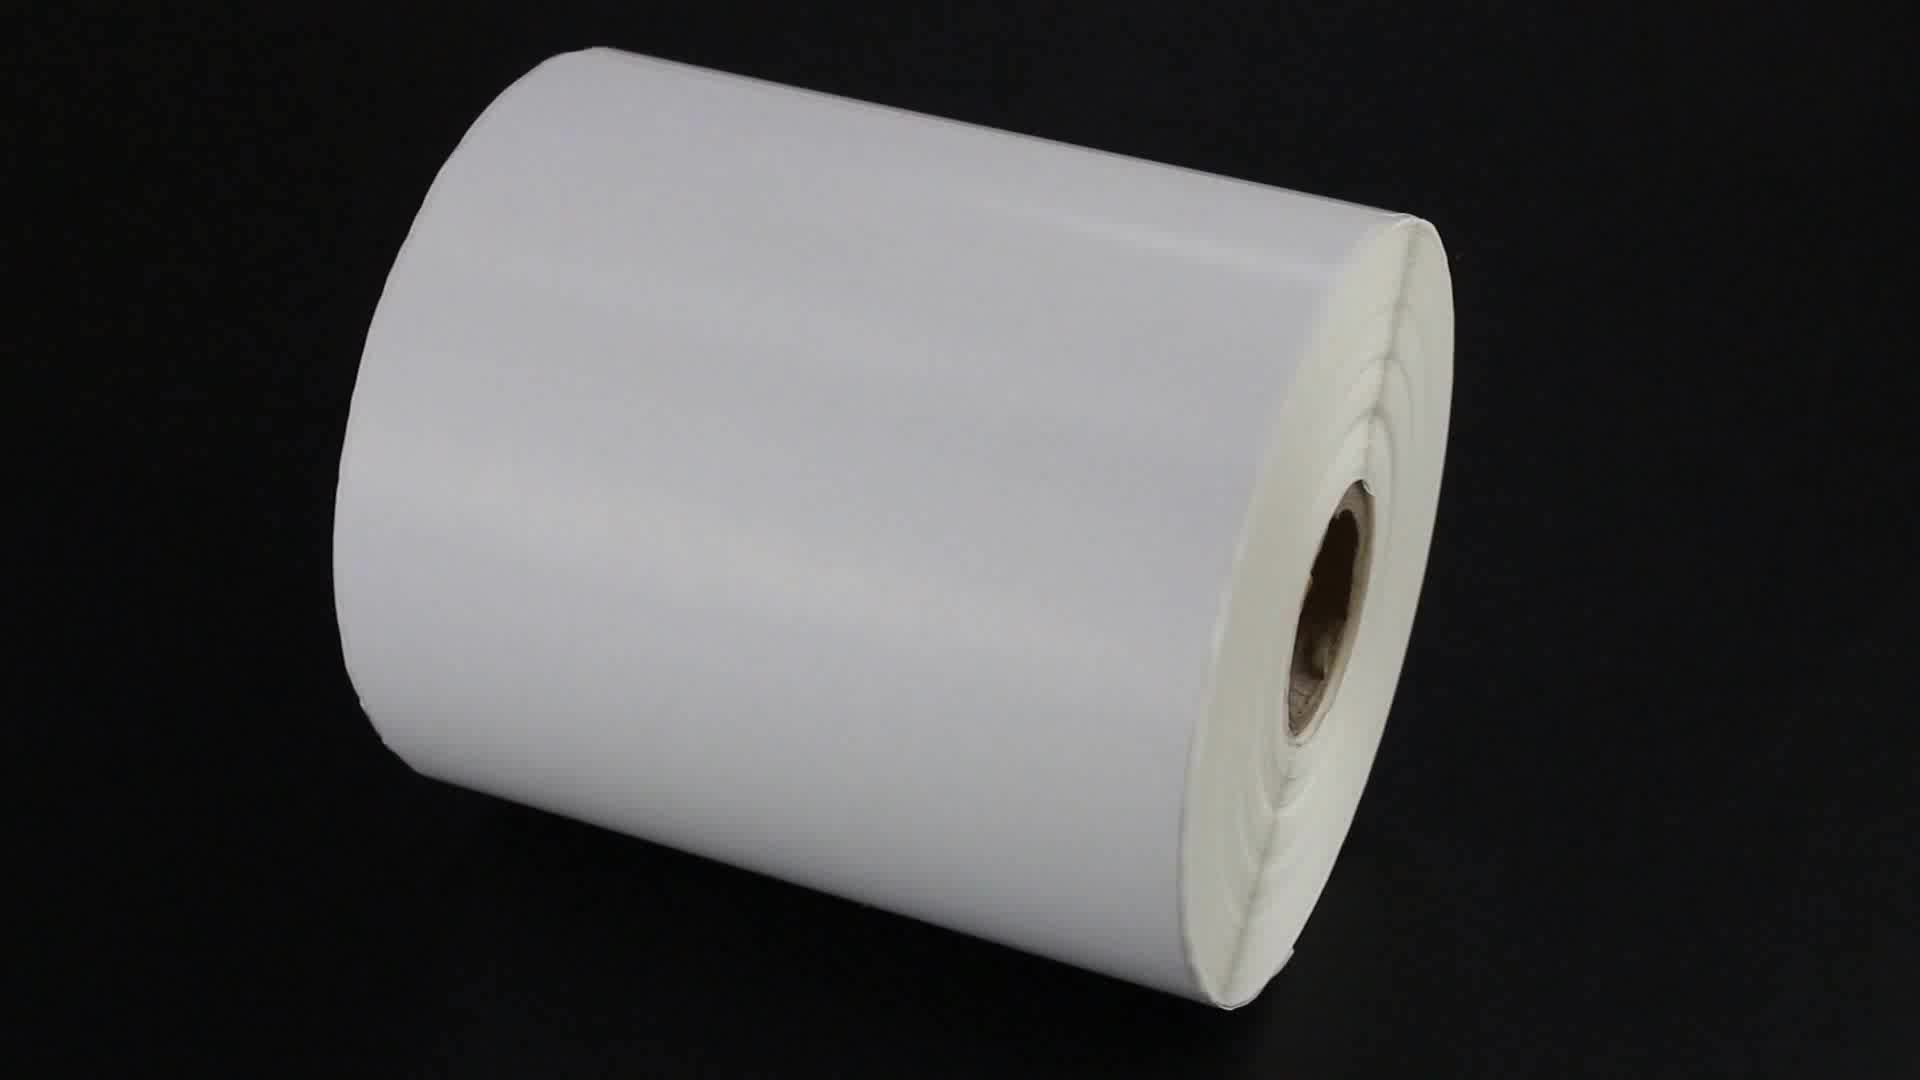 Made in China Premium Quality 4" x 6" 250 Labels Roll Zebra Direct Thermal Shipping Label Sticker Roll